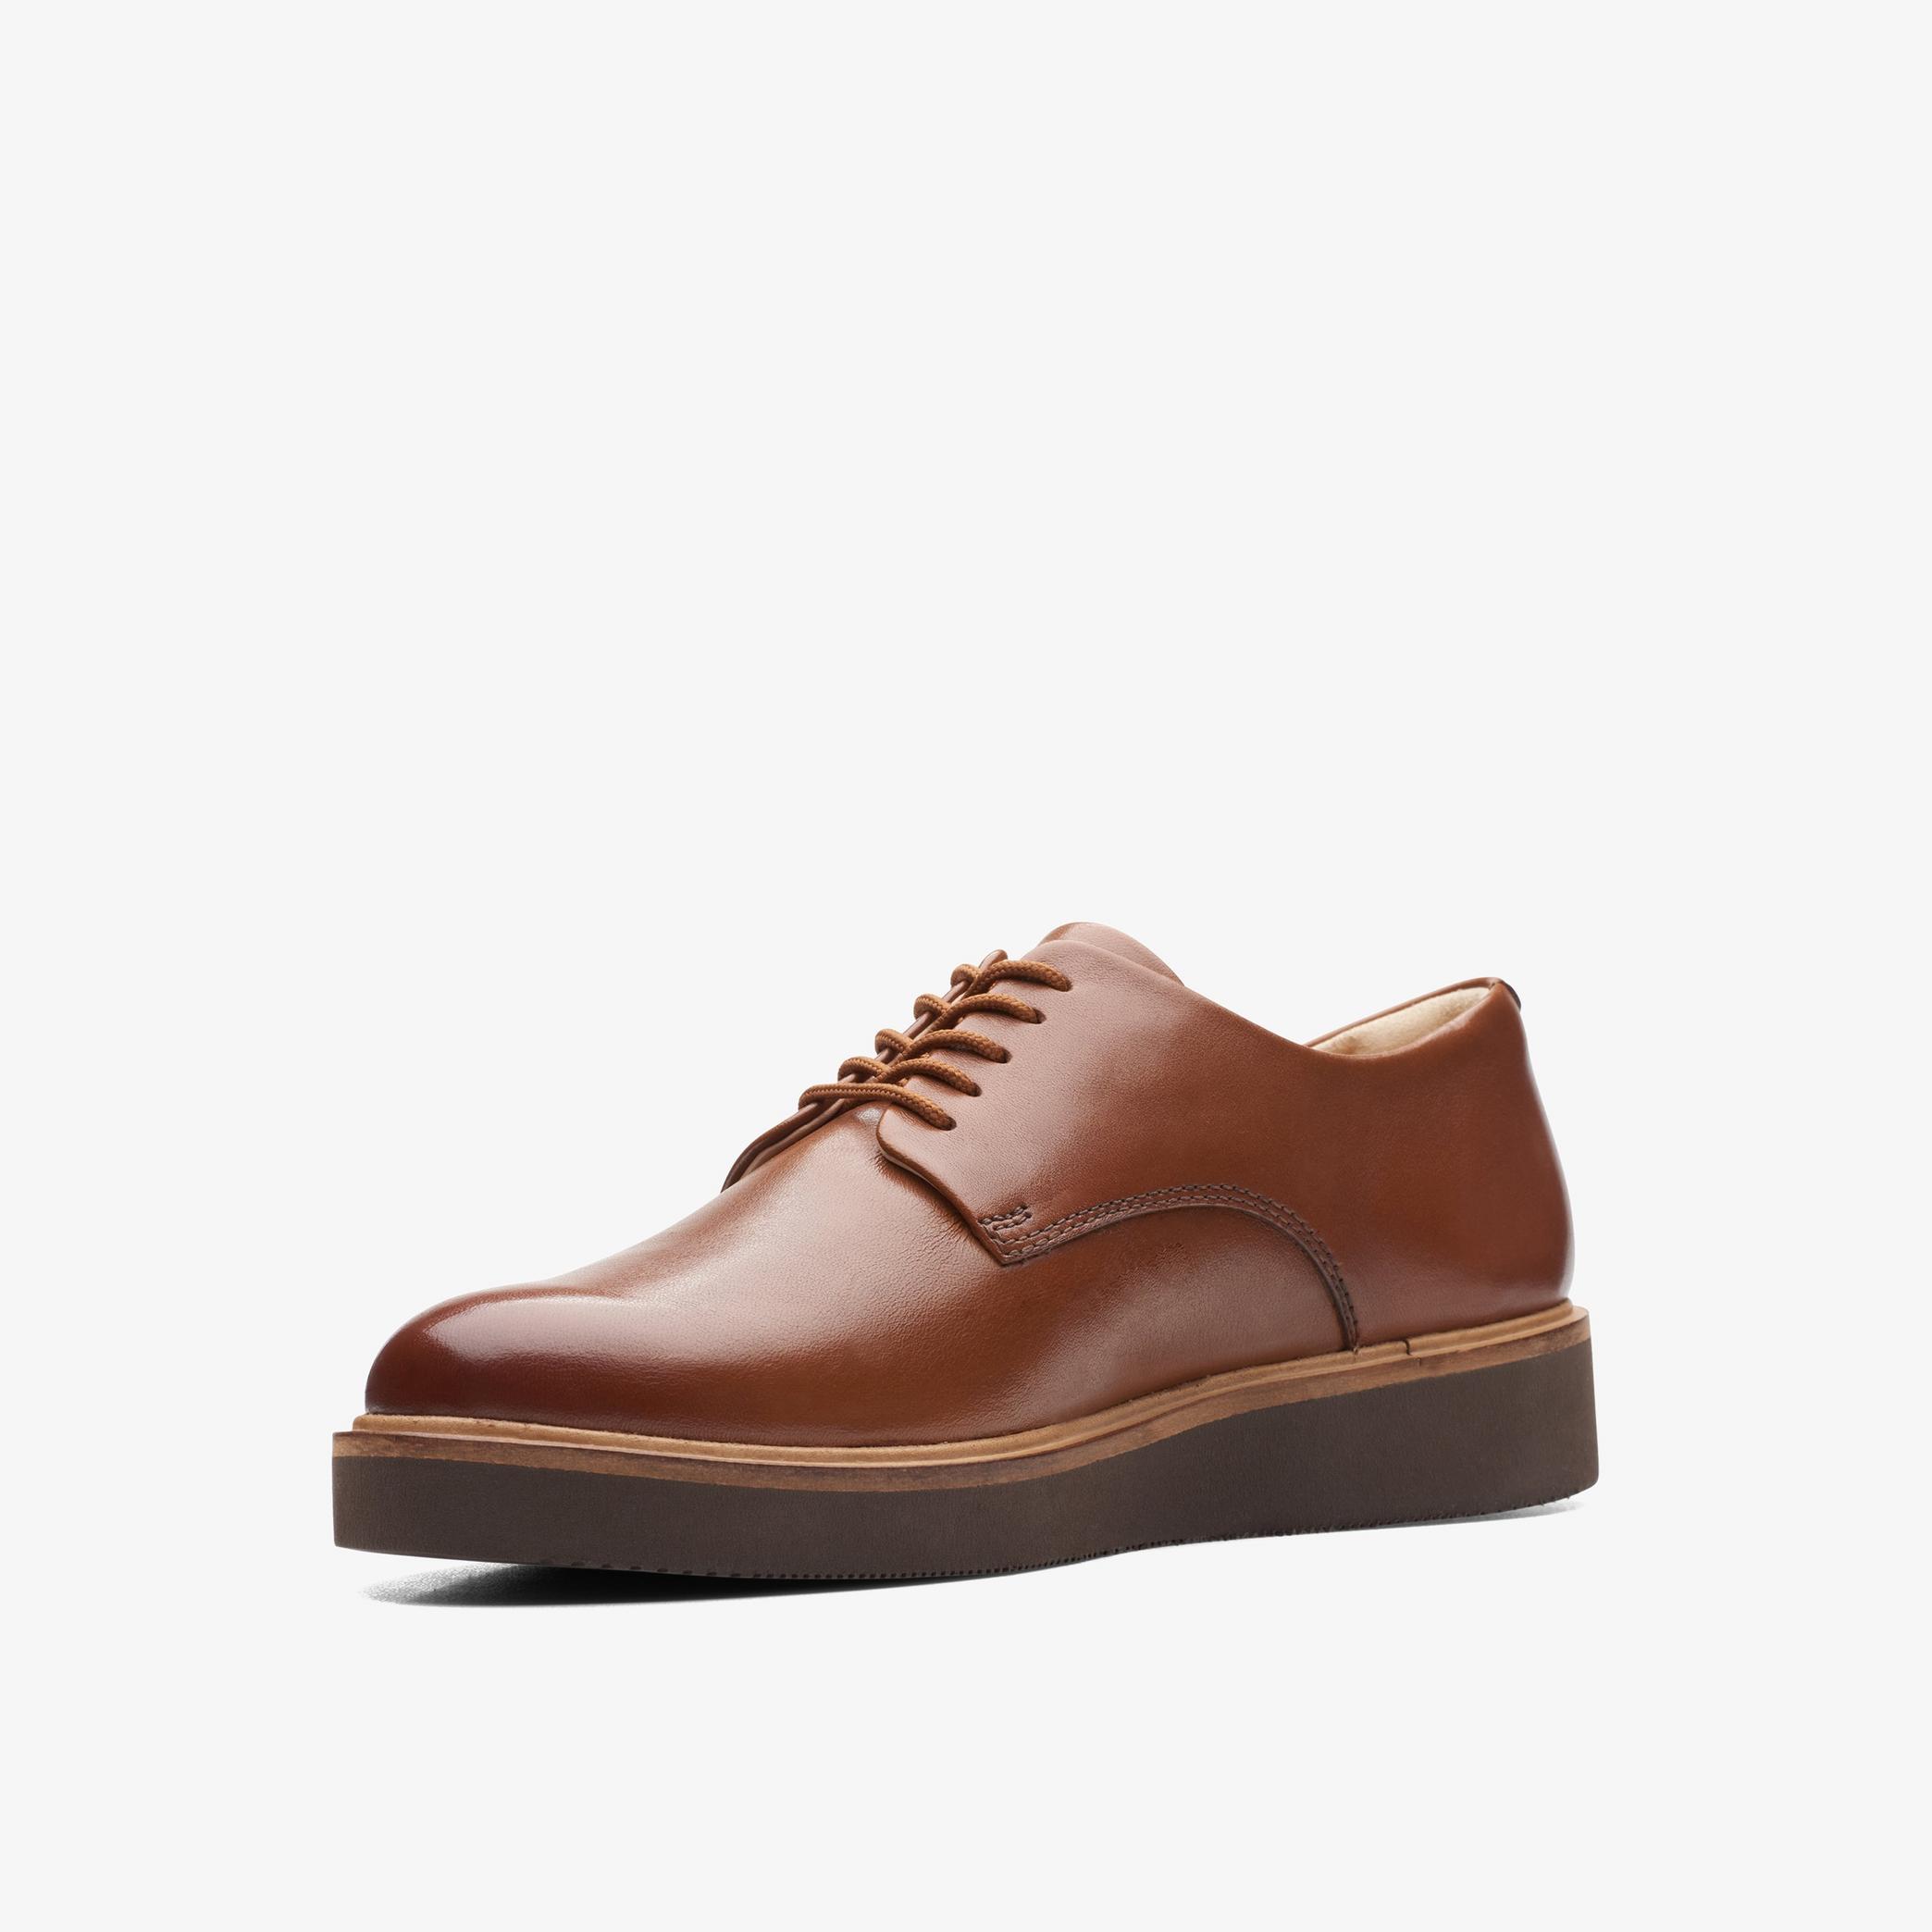 Glickly Derby Dark Tan Leather Derby Shoe, view 4 of 6